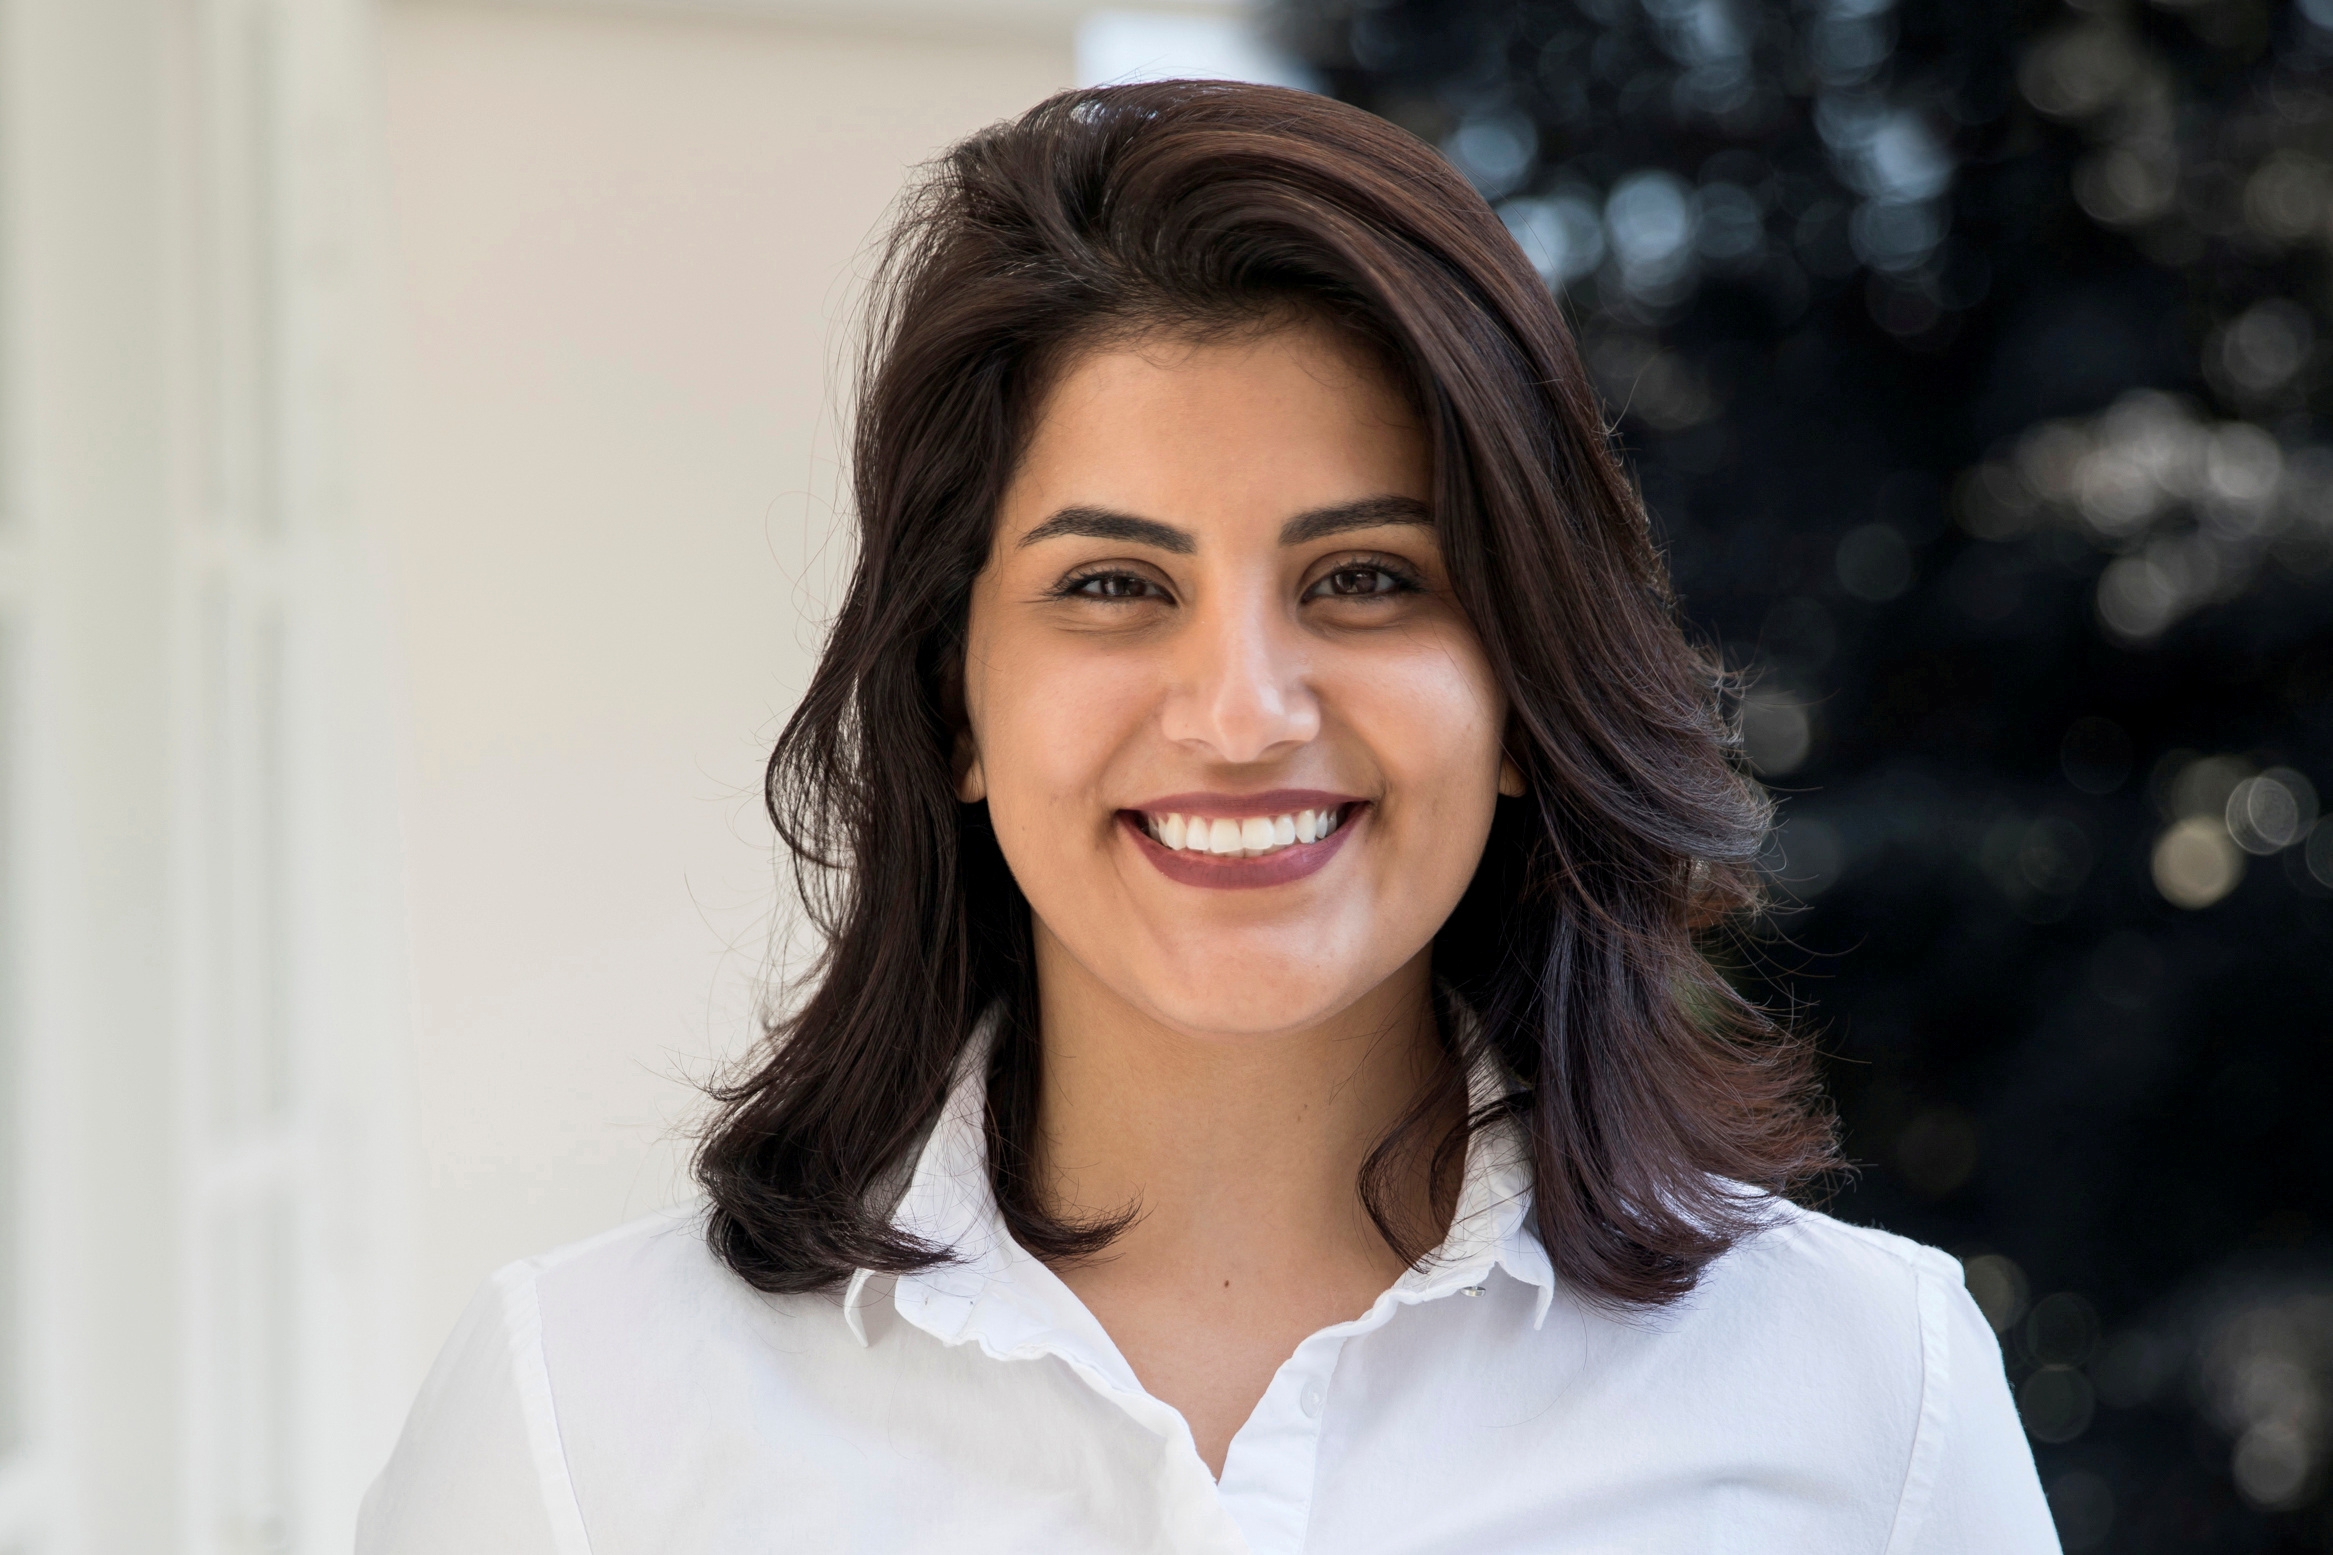 Loujain al-Hathloul is a Nobel prize-nominated activist who has allegedly been tortured while in prison